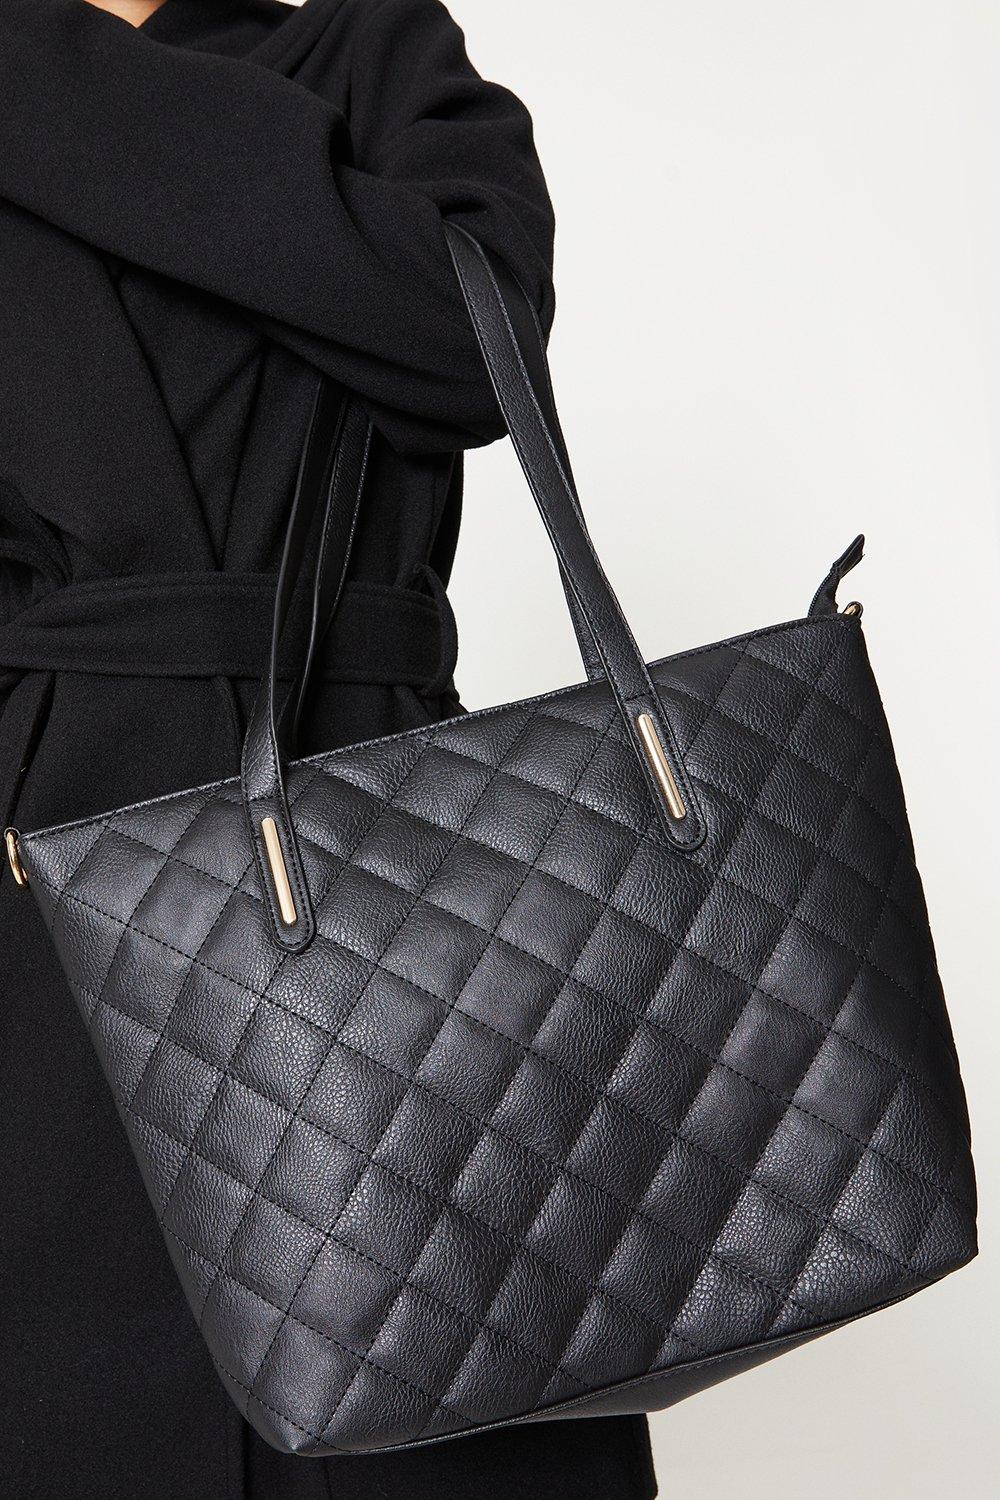 Women’s Tessa Quilted Tote Bag - black - ONE SIZE